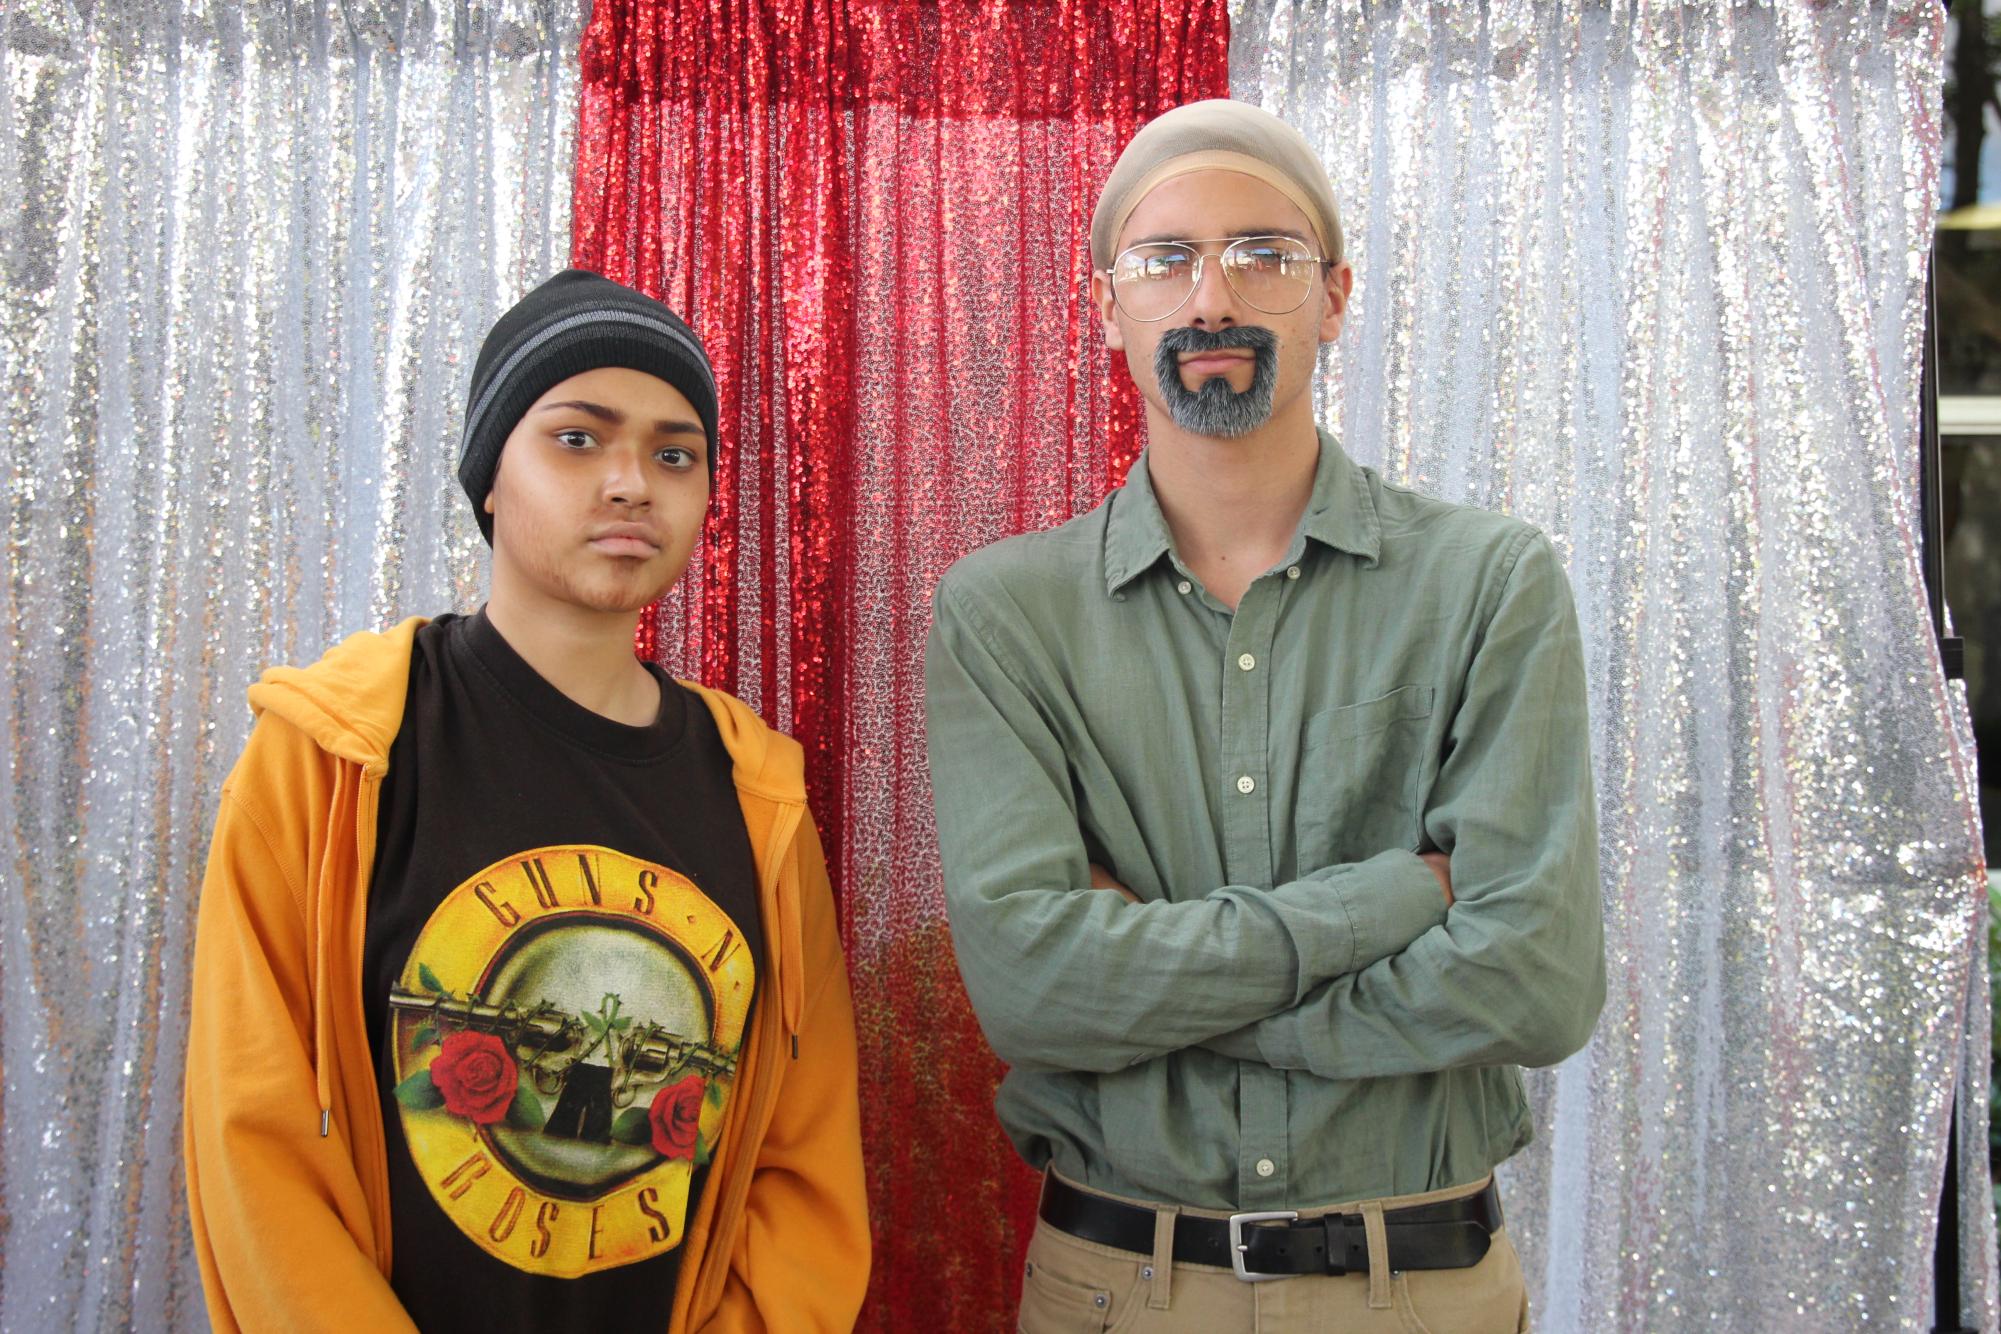 Dressed as the dynamic duo from Breaking Bad, Jesse Pinkman and Walter White, students embody their characters personalities for a pose. 